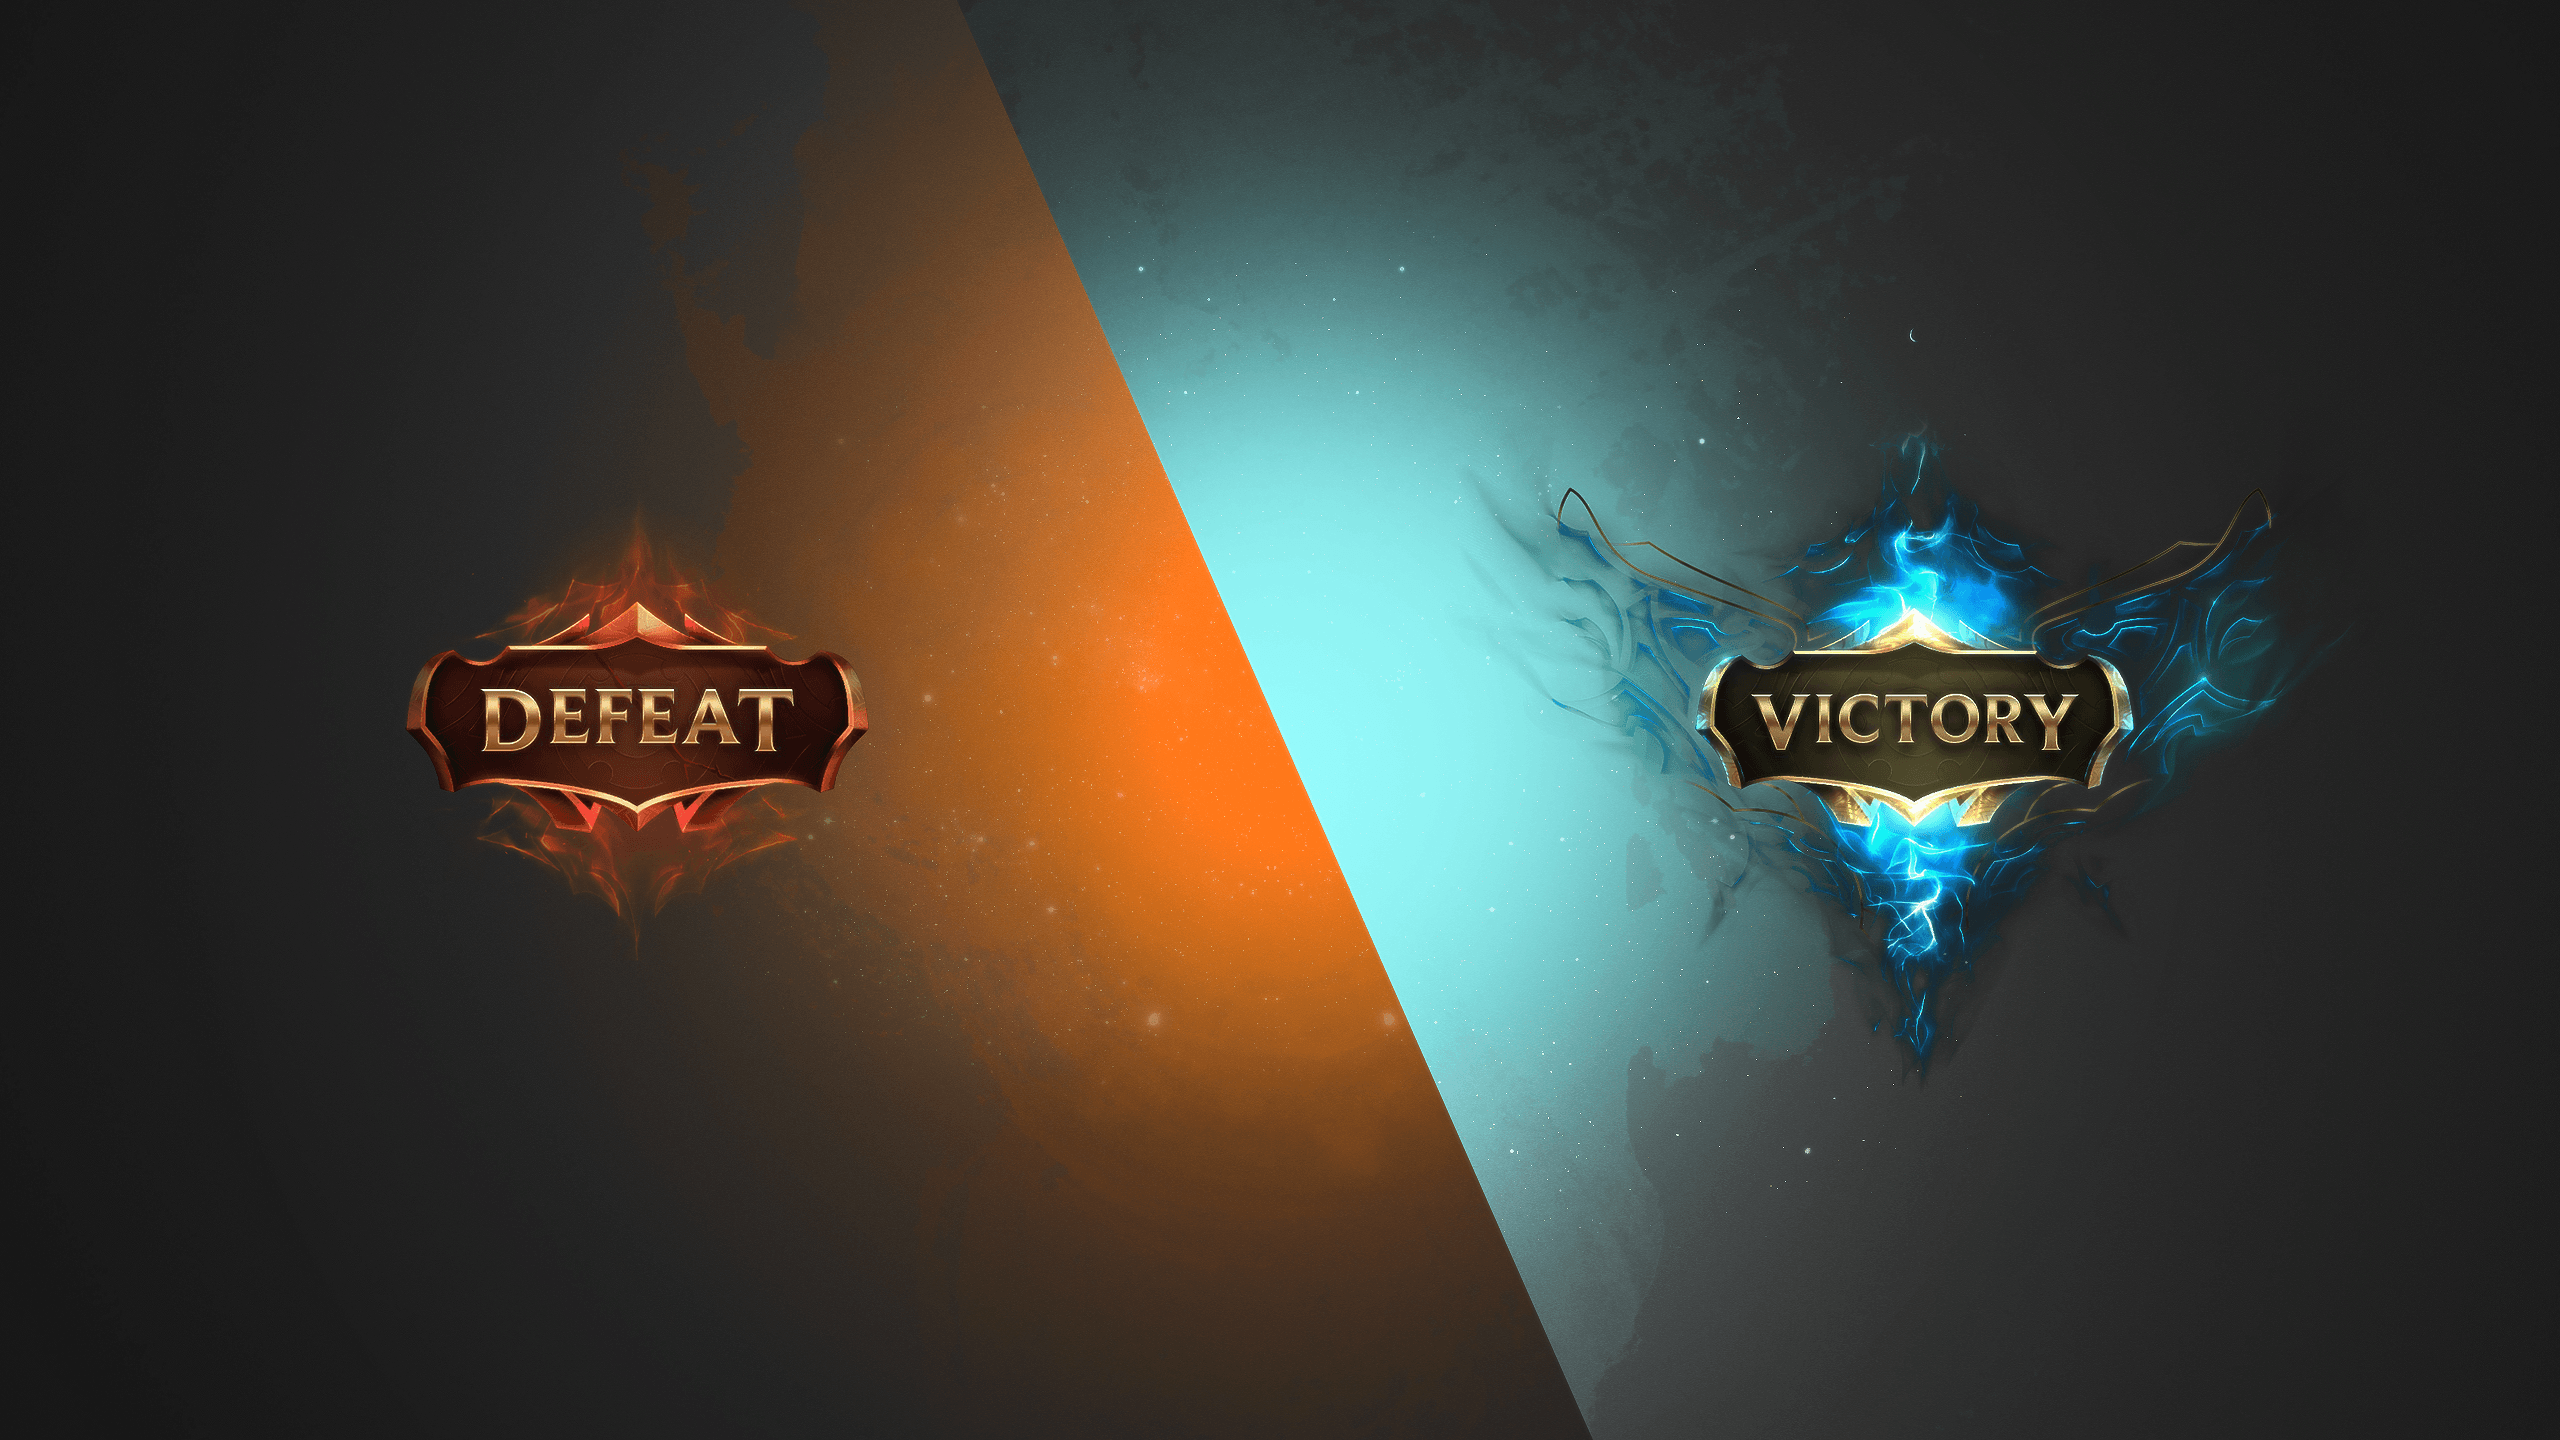 I Made Some Wallpaper With The New Victory Defeat Image